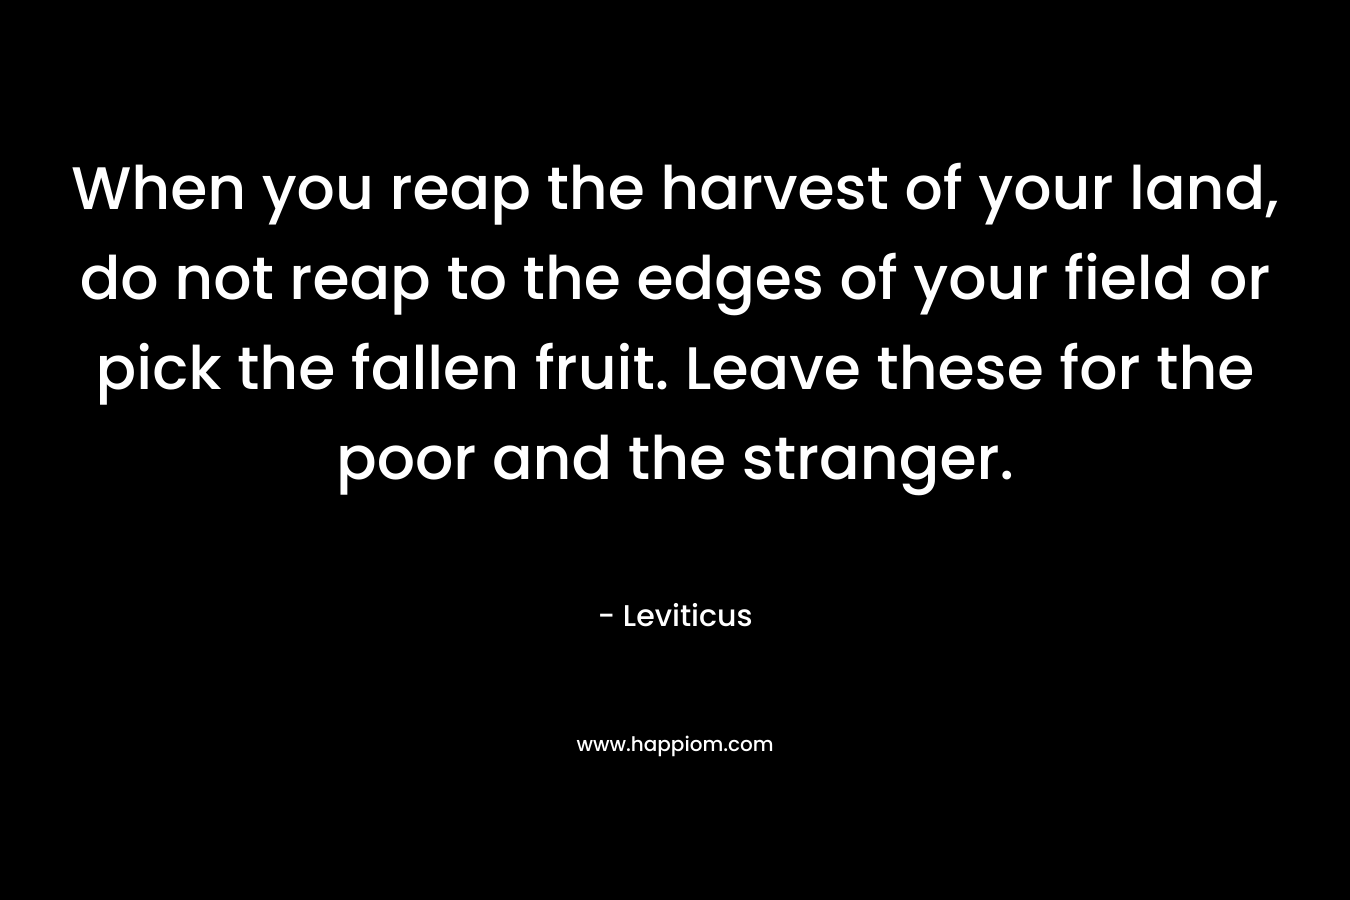 When you reap the harvest of your land, do not reap to the edges of your field or pick the fallen fruit. Leave these for the poor and the stranger. – Leviticus